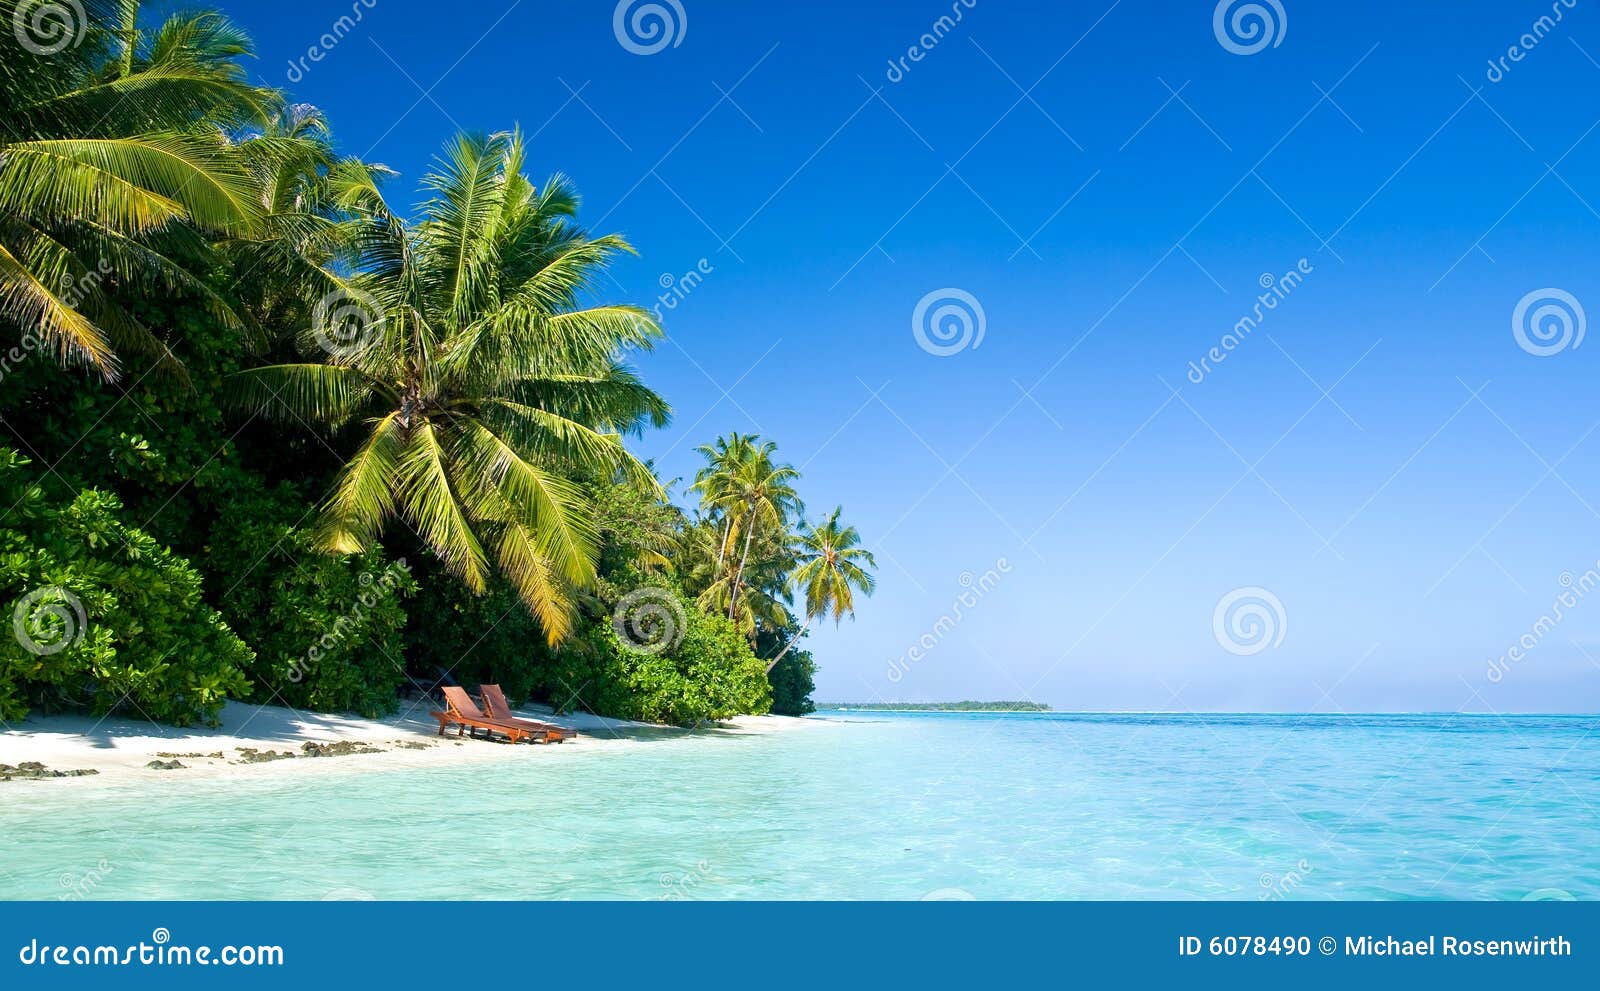 Beautiful tropical beach with deck chairs.